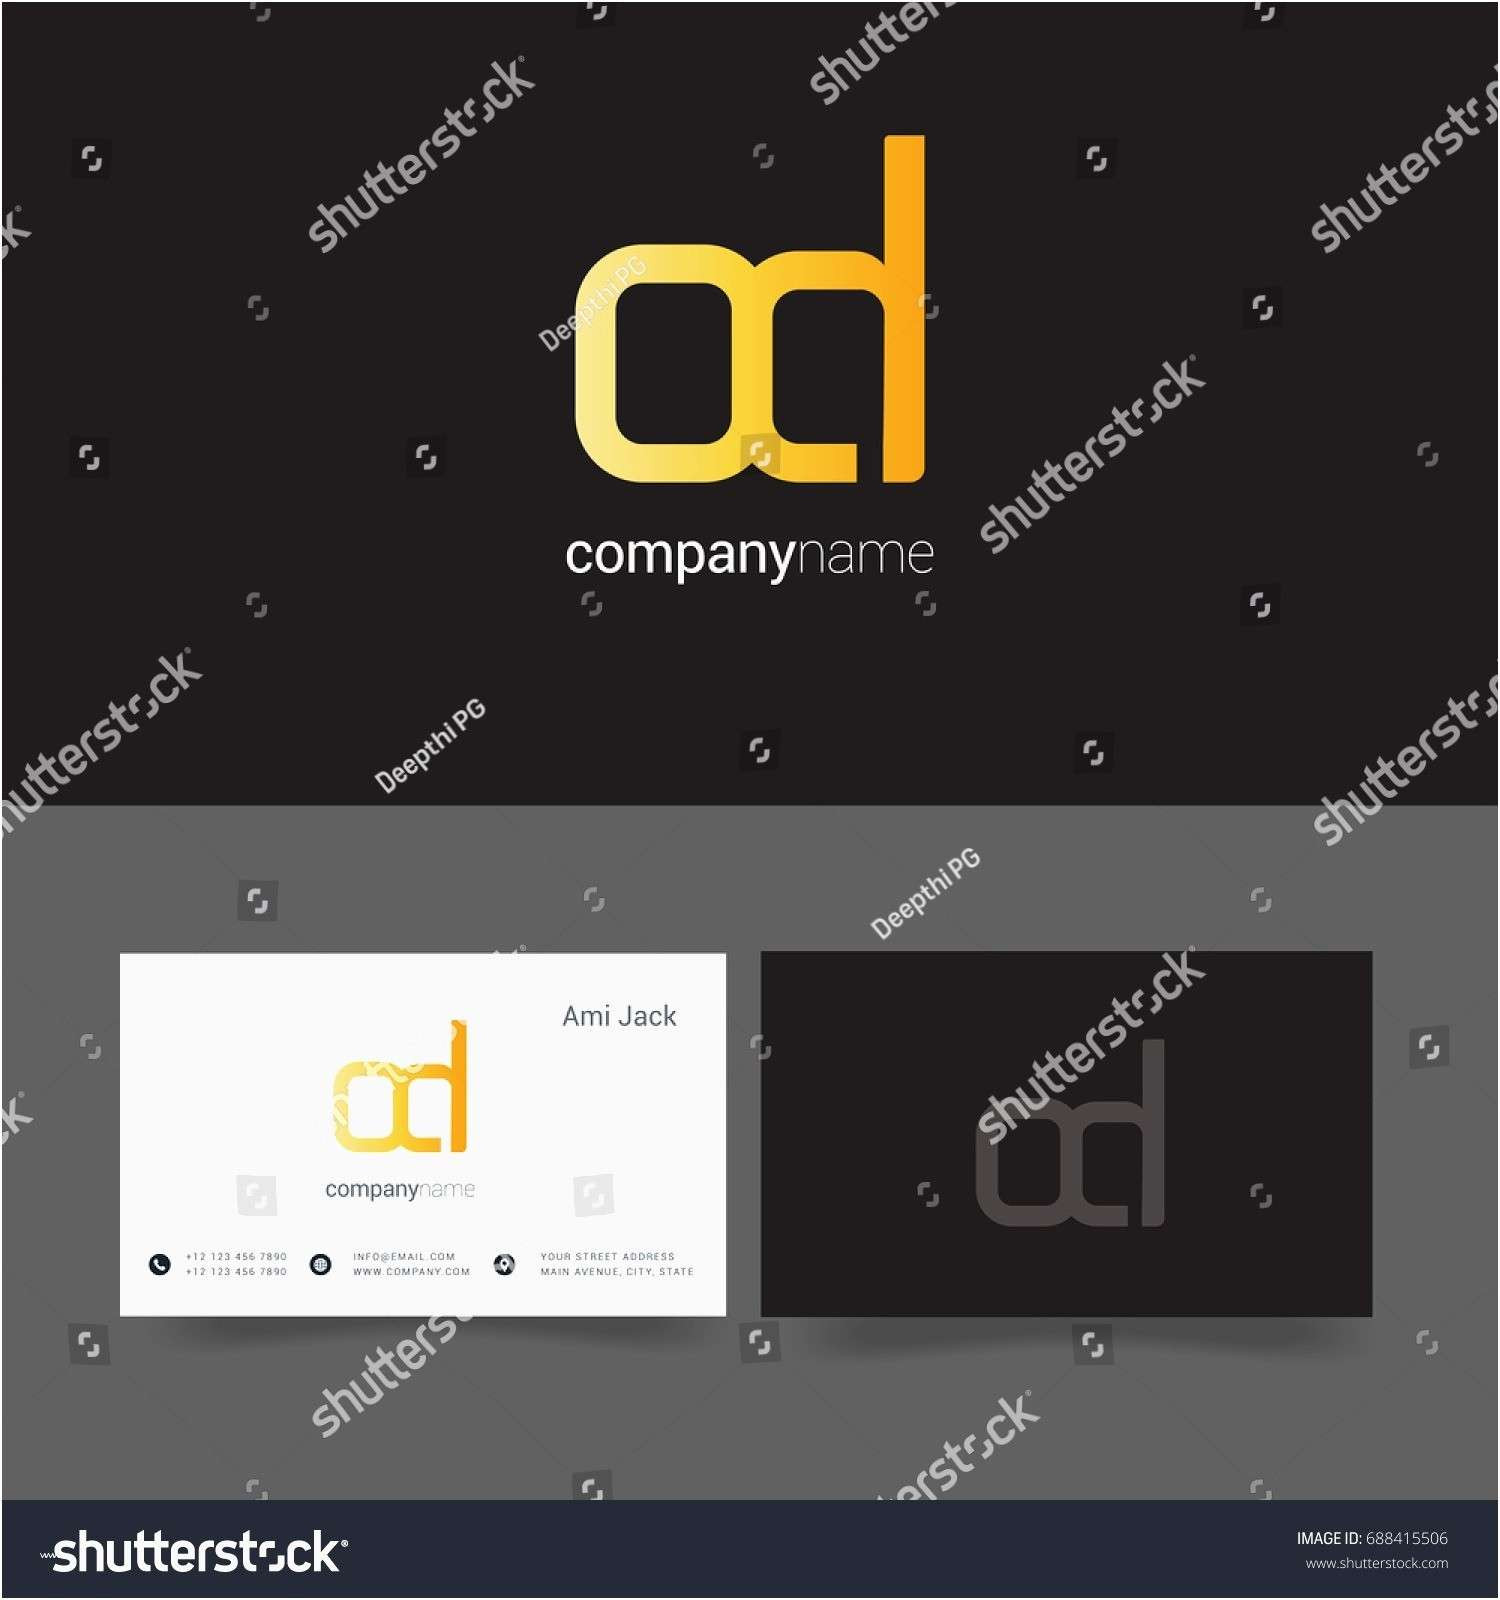 Business Cards Template Free Caquetapositivo Of Free Business Card Templates